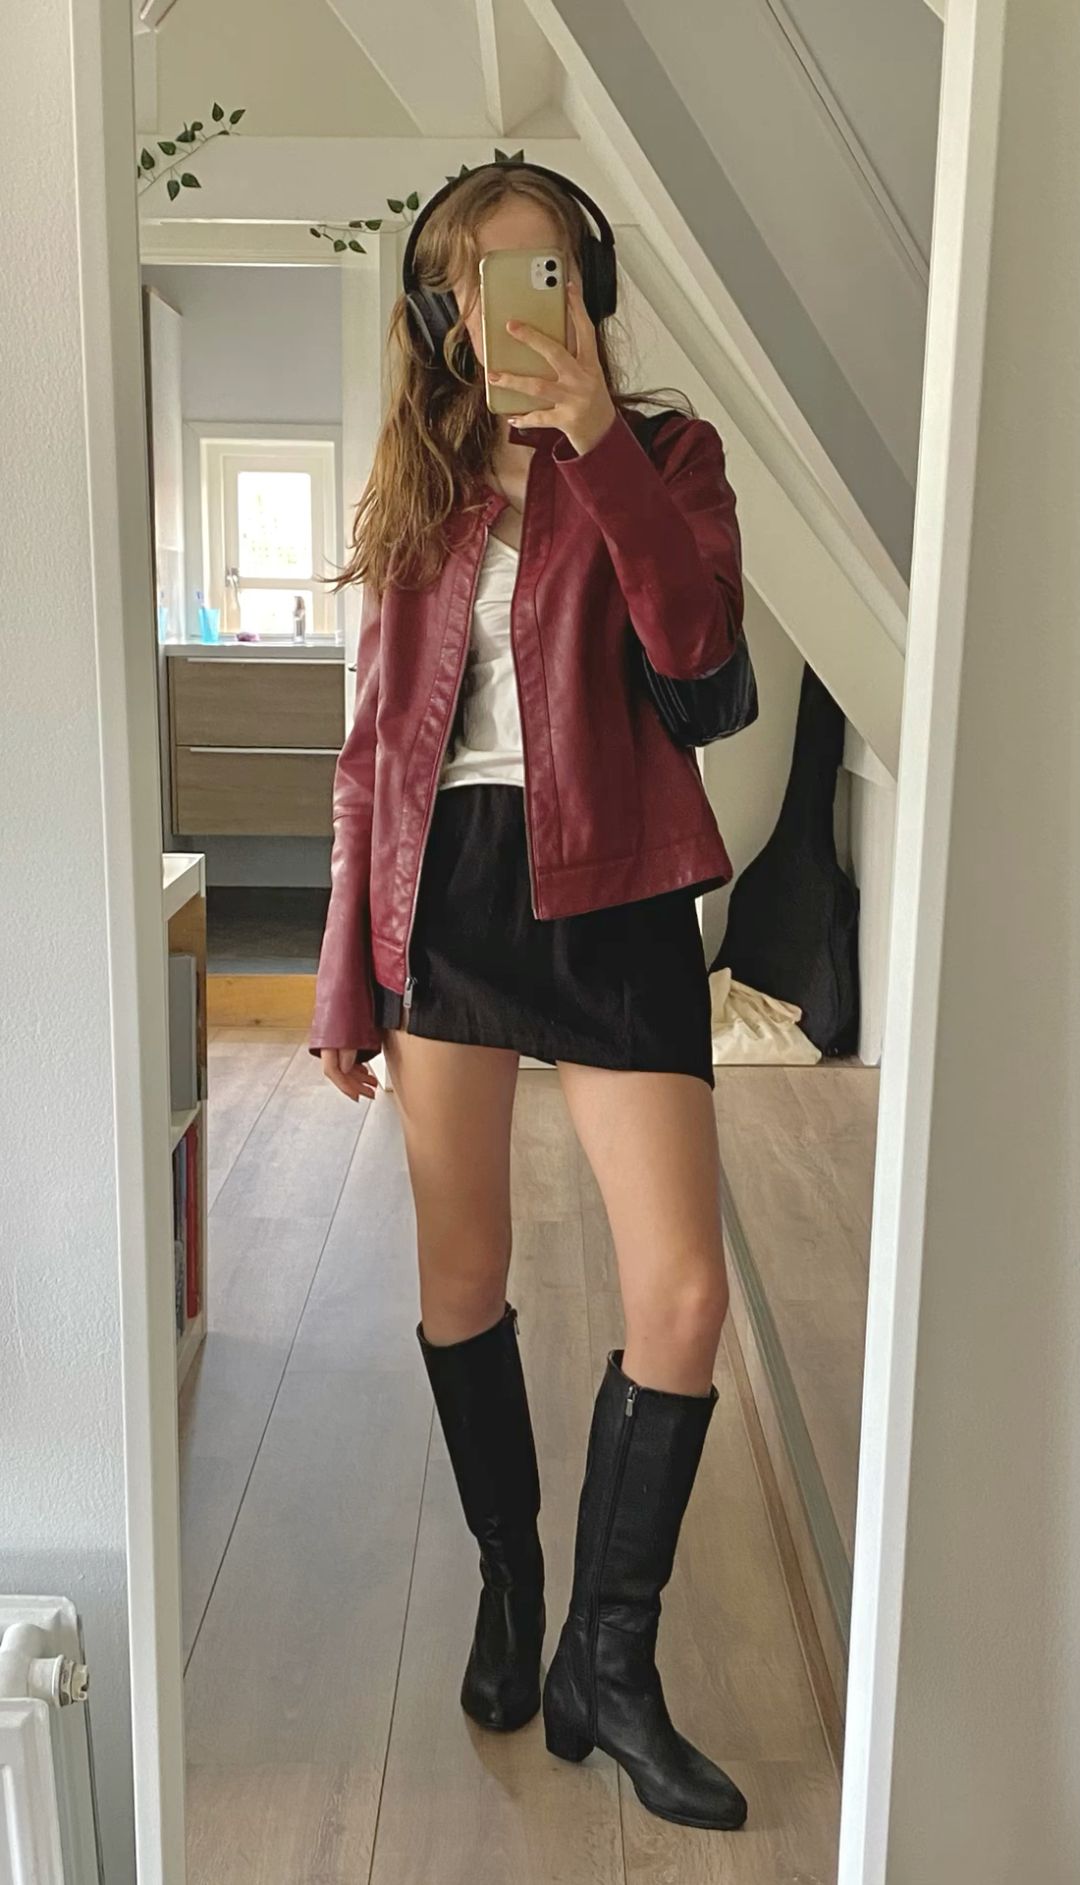 How to Wear Burgundy Leather Jacket: 15 Best Outfit Ideas for Women